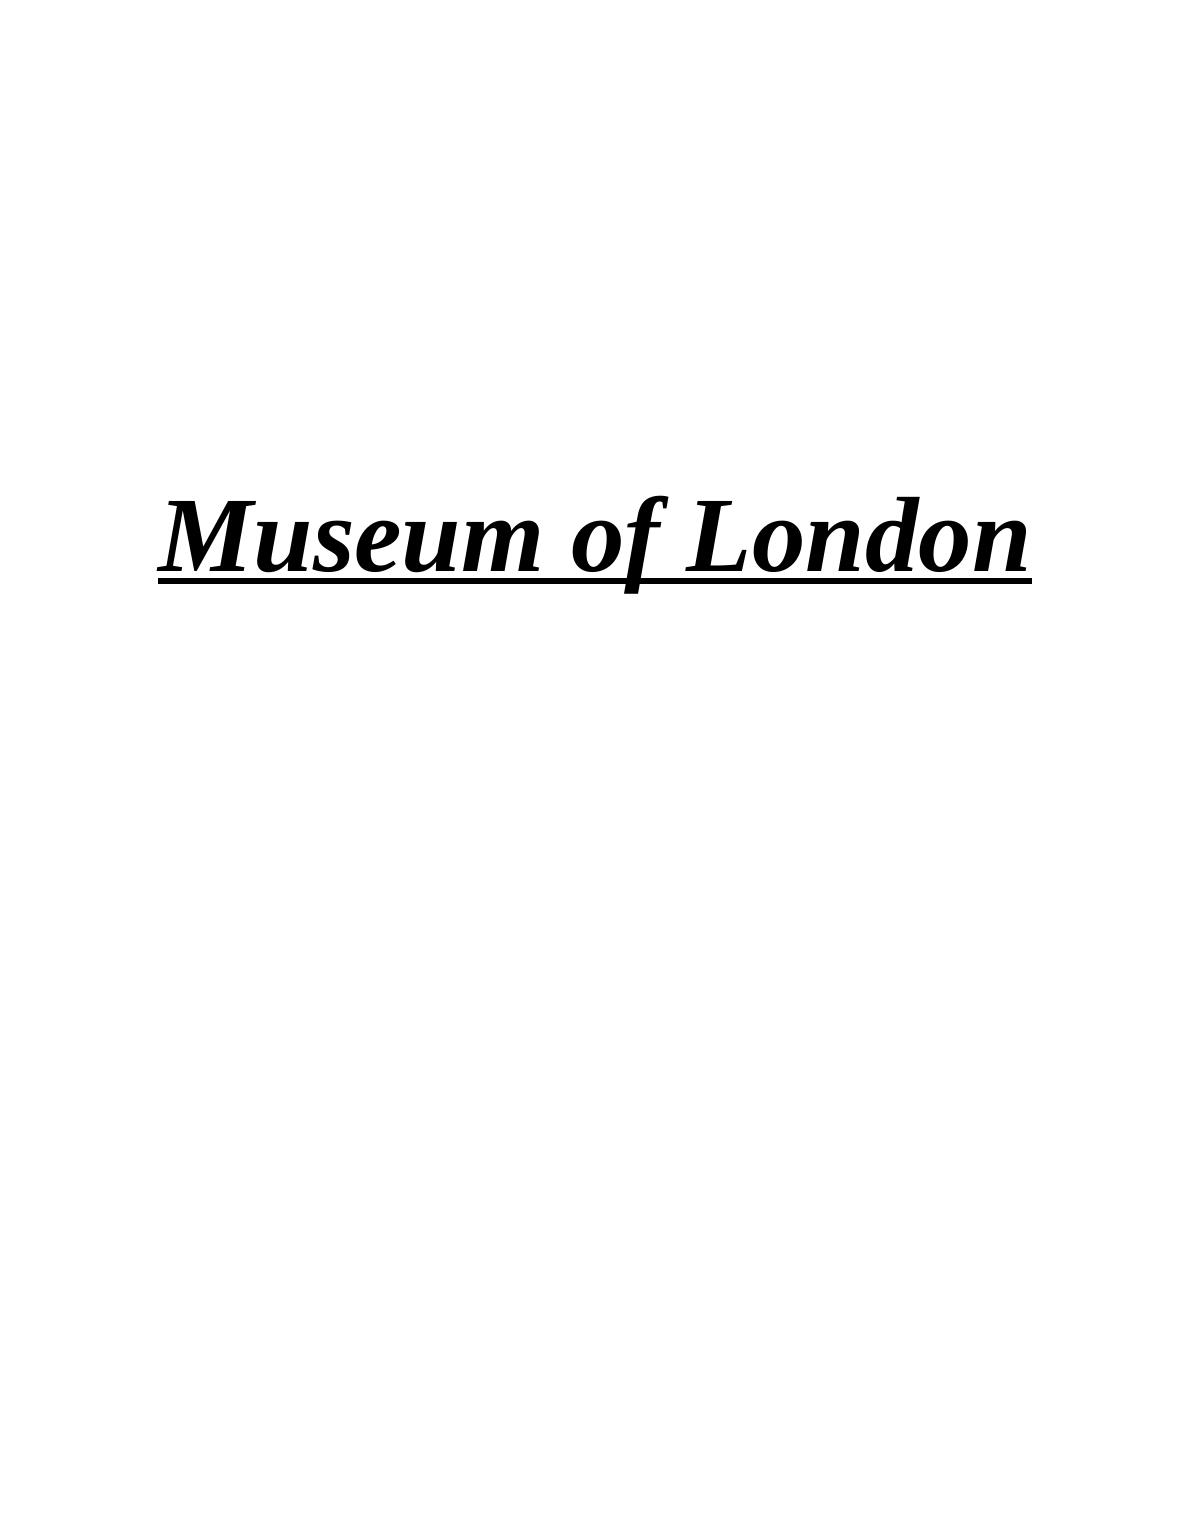 Museum of London: Overview, Objectives, Sustainability, Governance_1